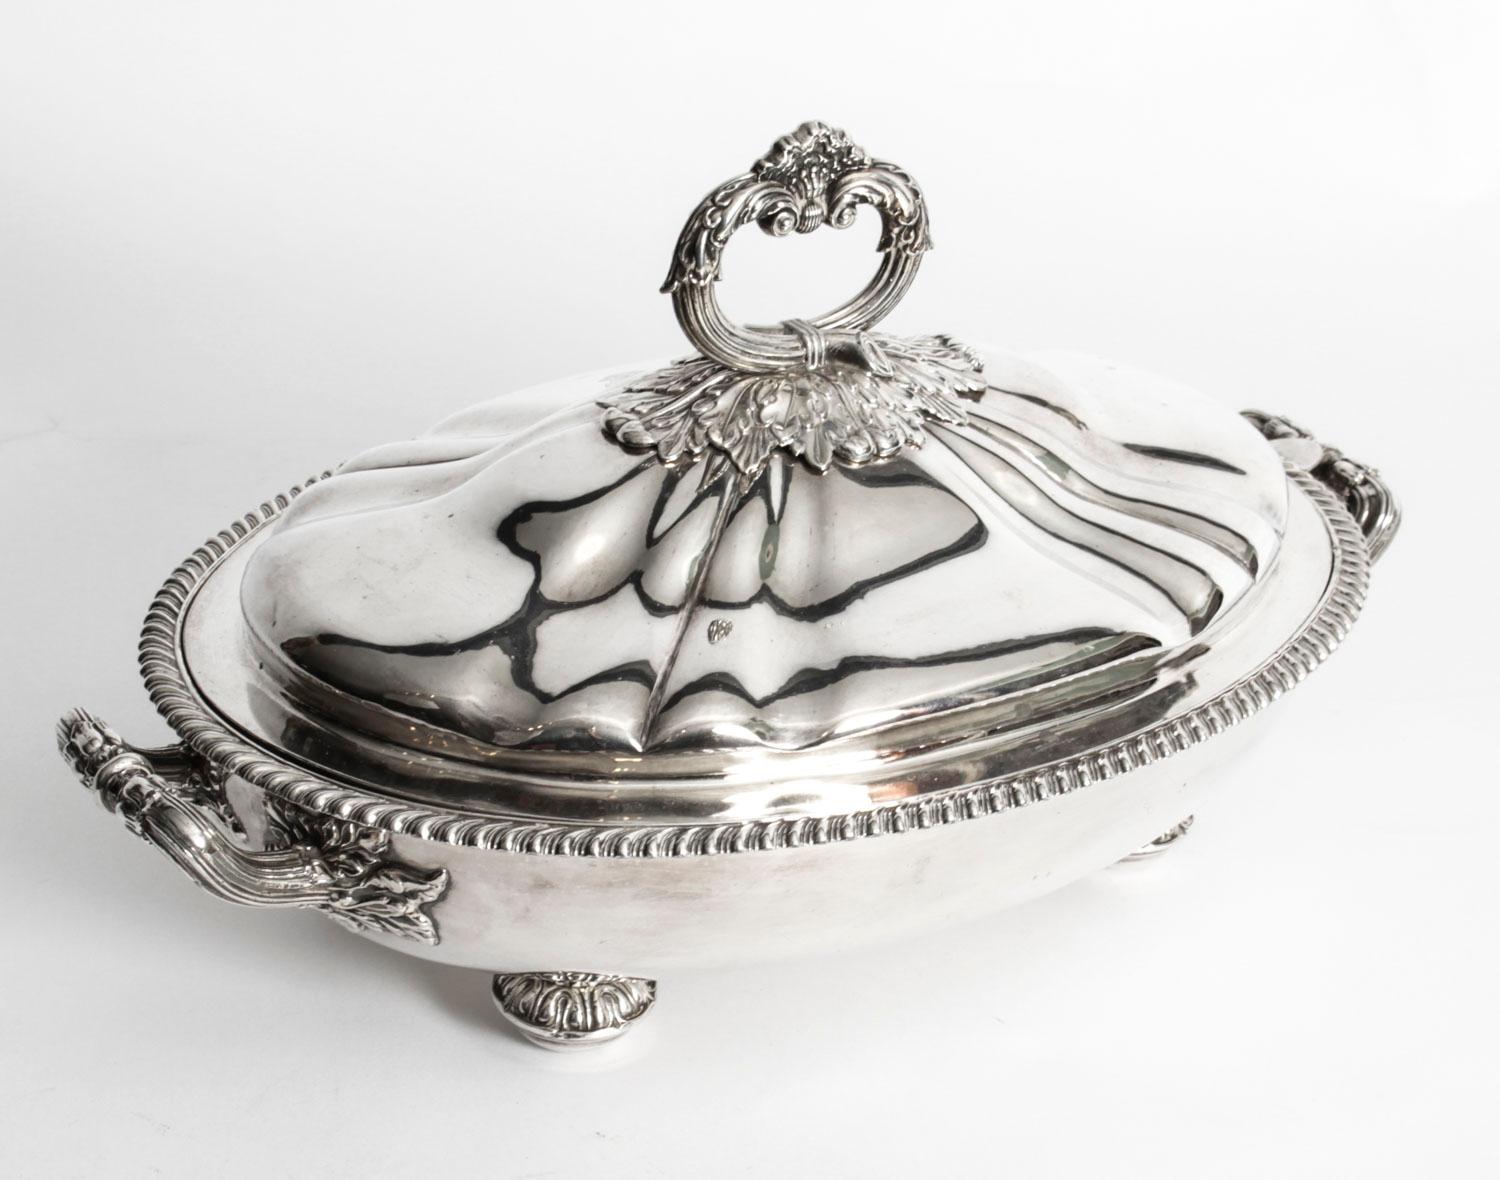 This is an exquisite and rare antique English Old Sheffield plate entree dish bearing the makers mark for The Cross Arrows Company, Circa 1820 in date.

This stunning shaped oval entree dishe features an impressive chased loop handle with splendid